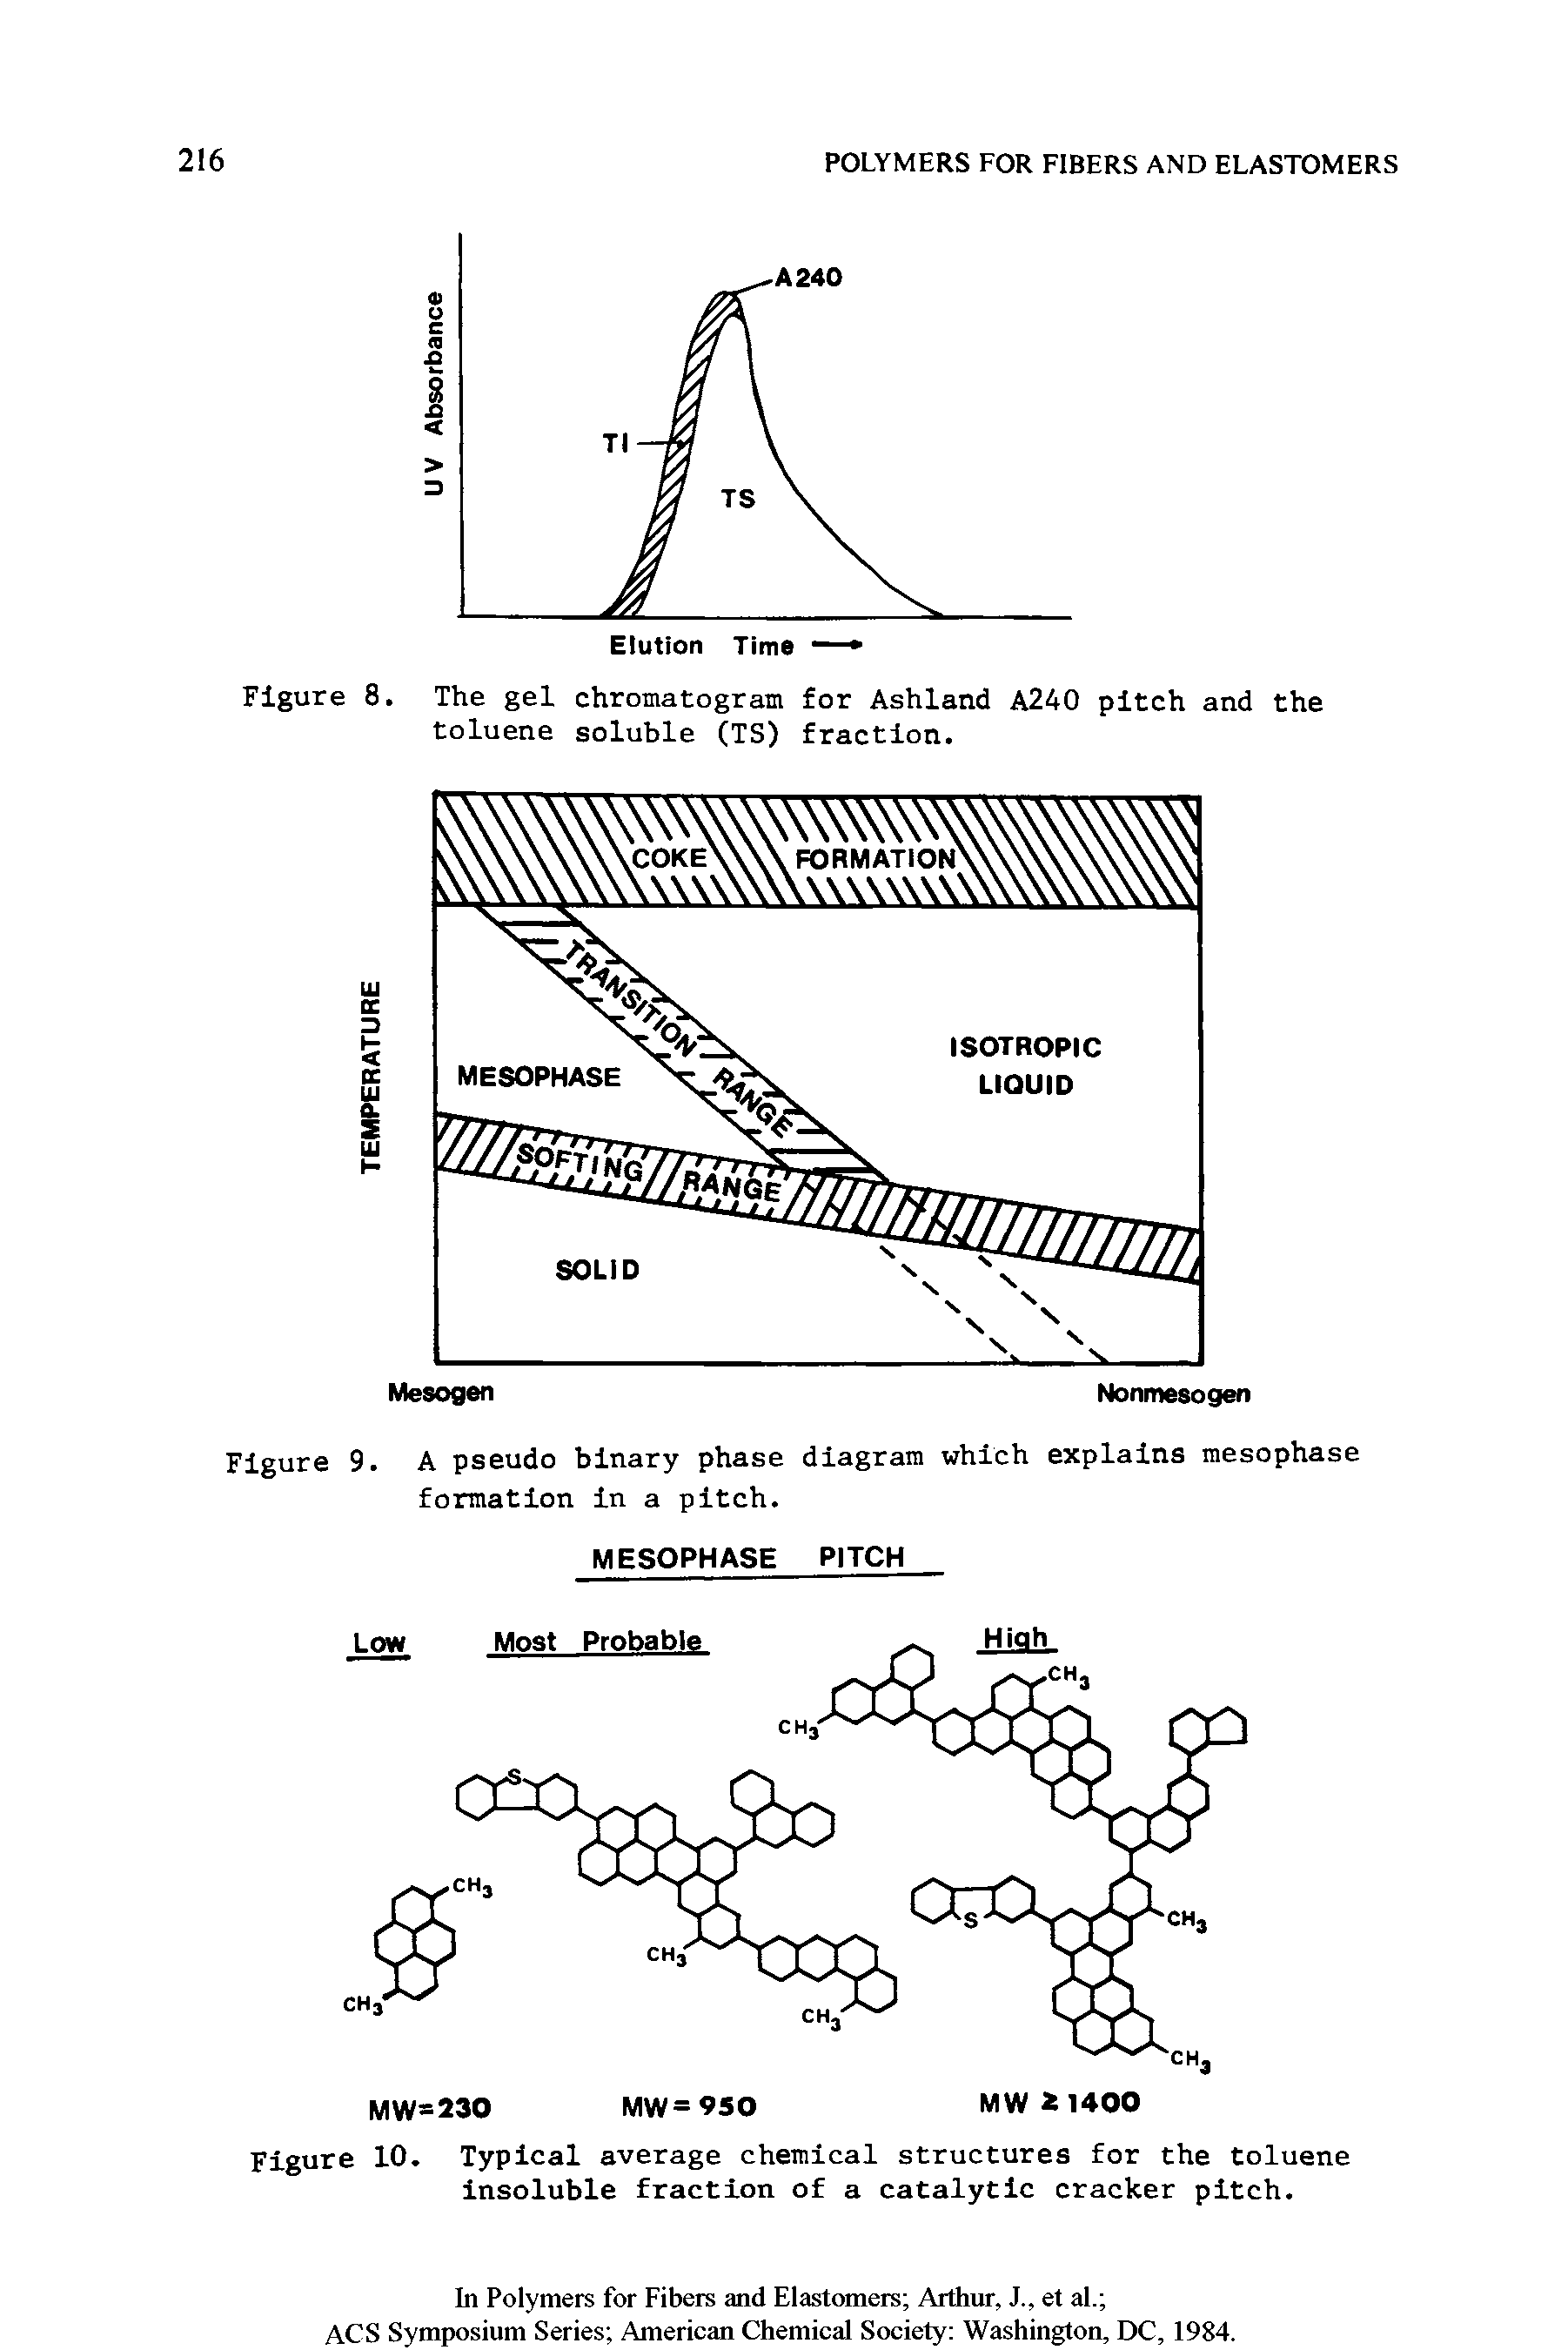 Figure 9. A pseudo binary phase diagram which explains mesophase formation in a pitch.